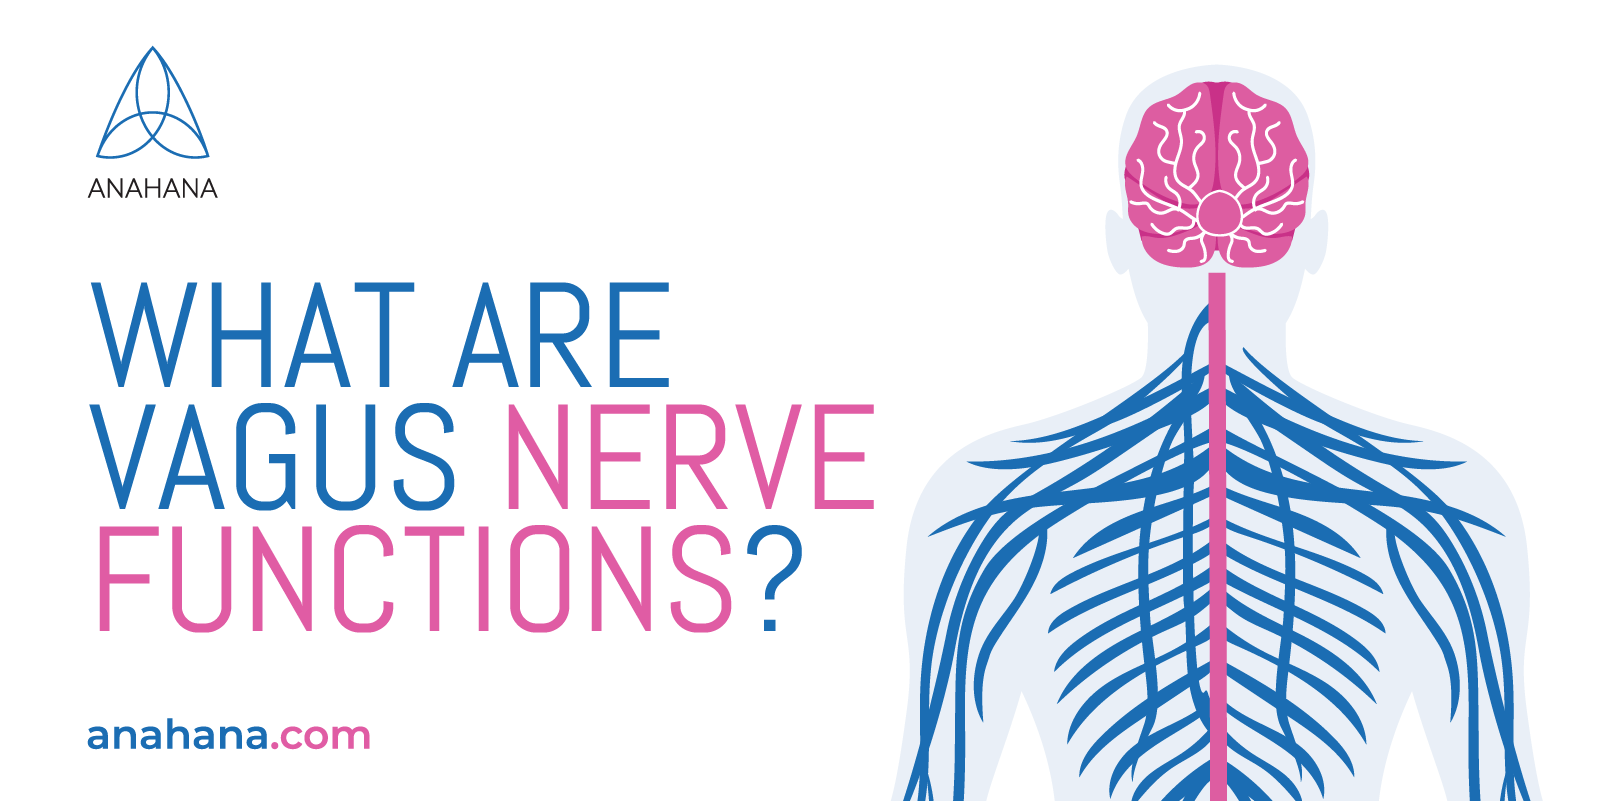 the functions of the vagus nerve